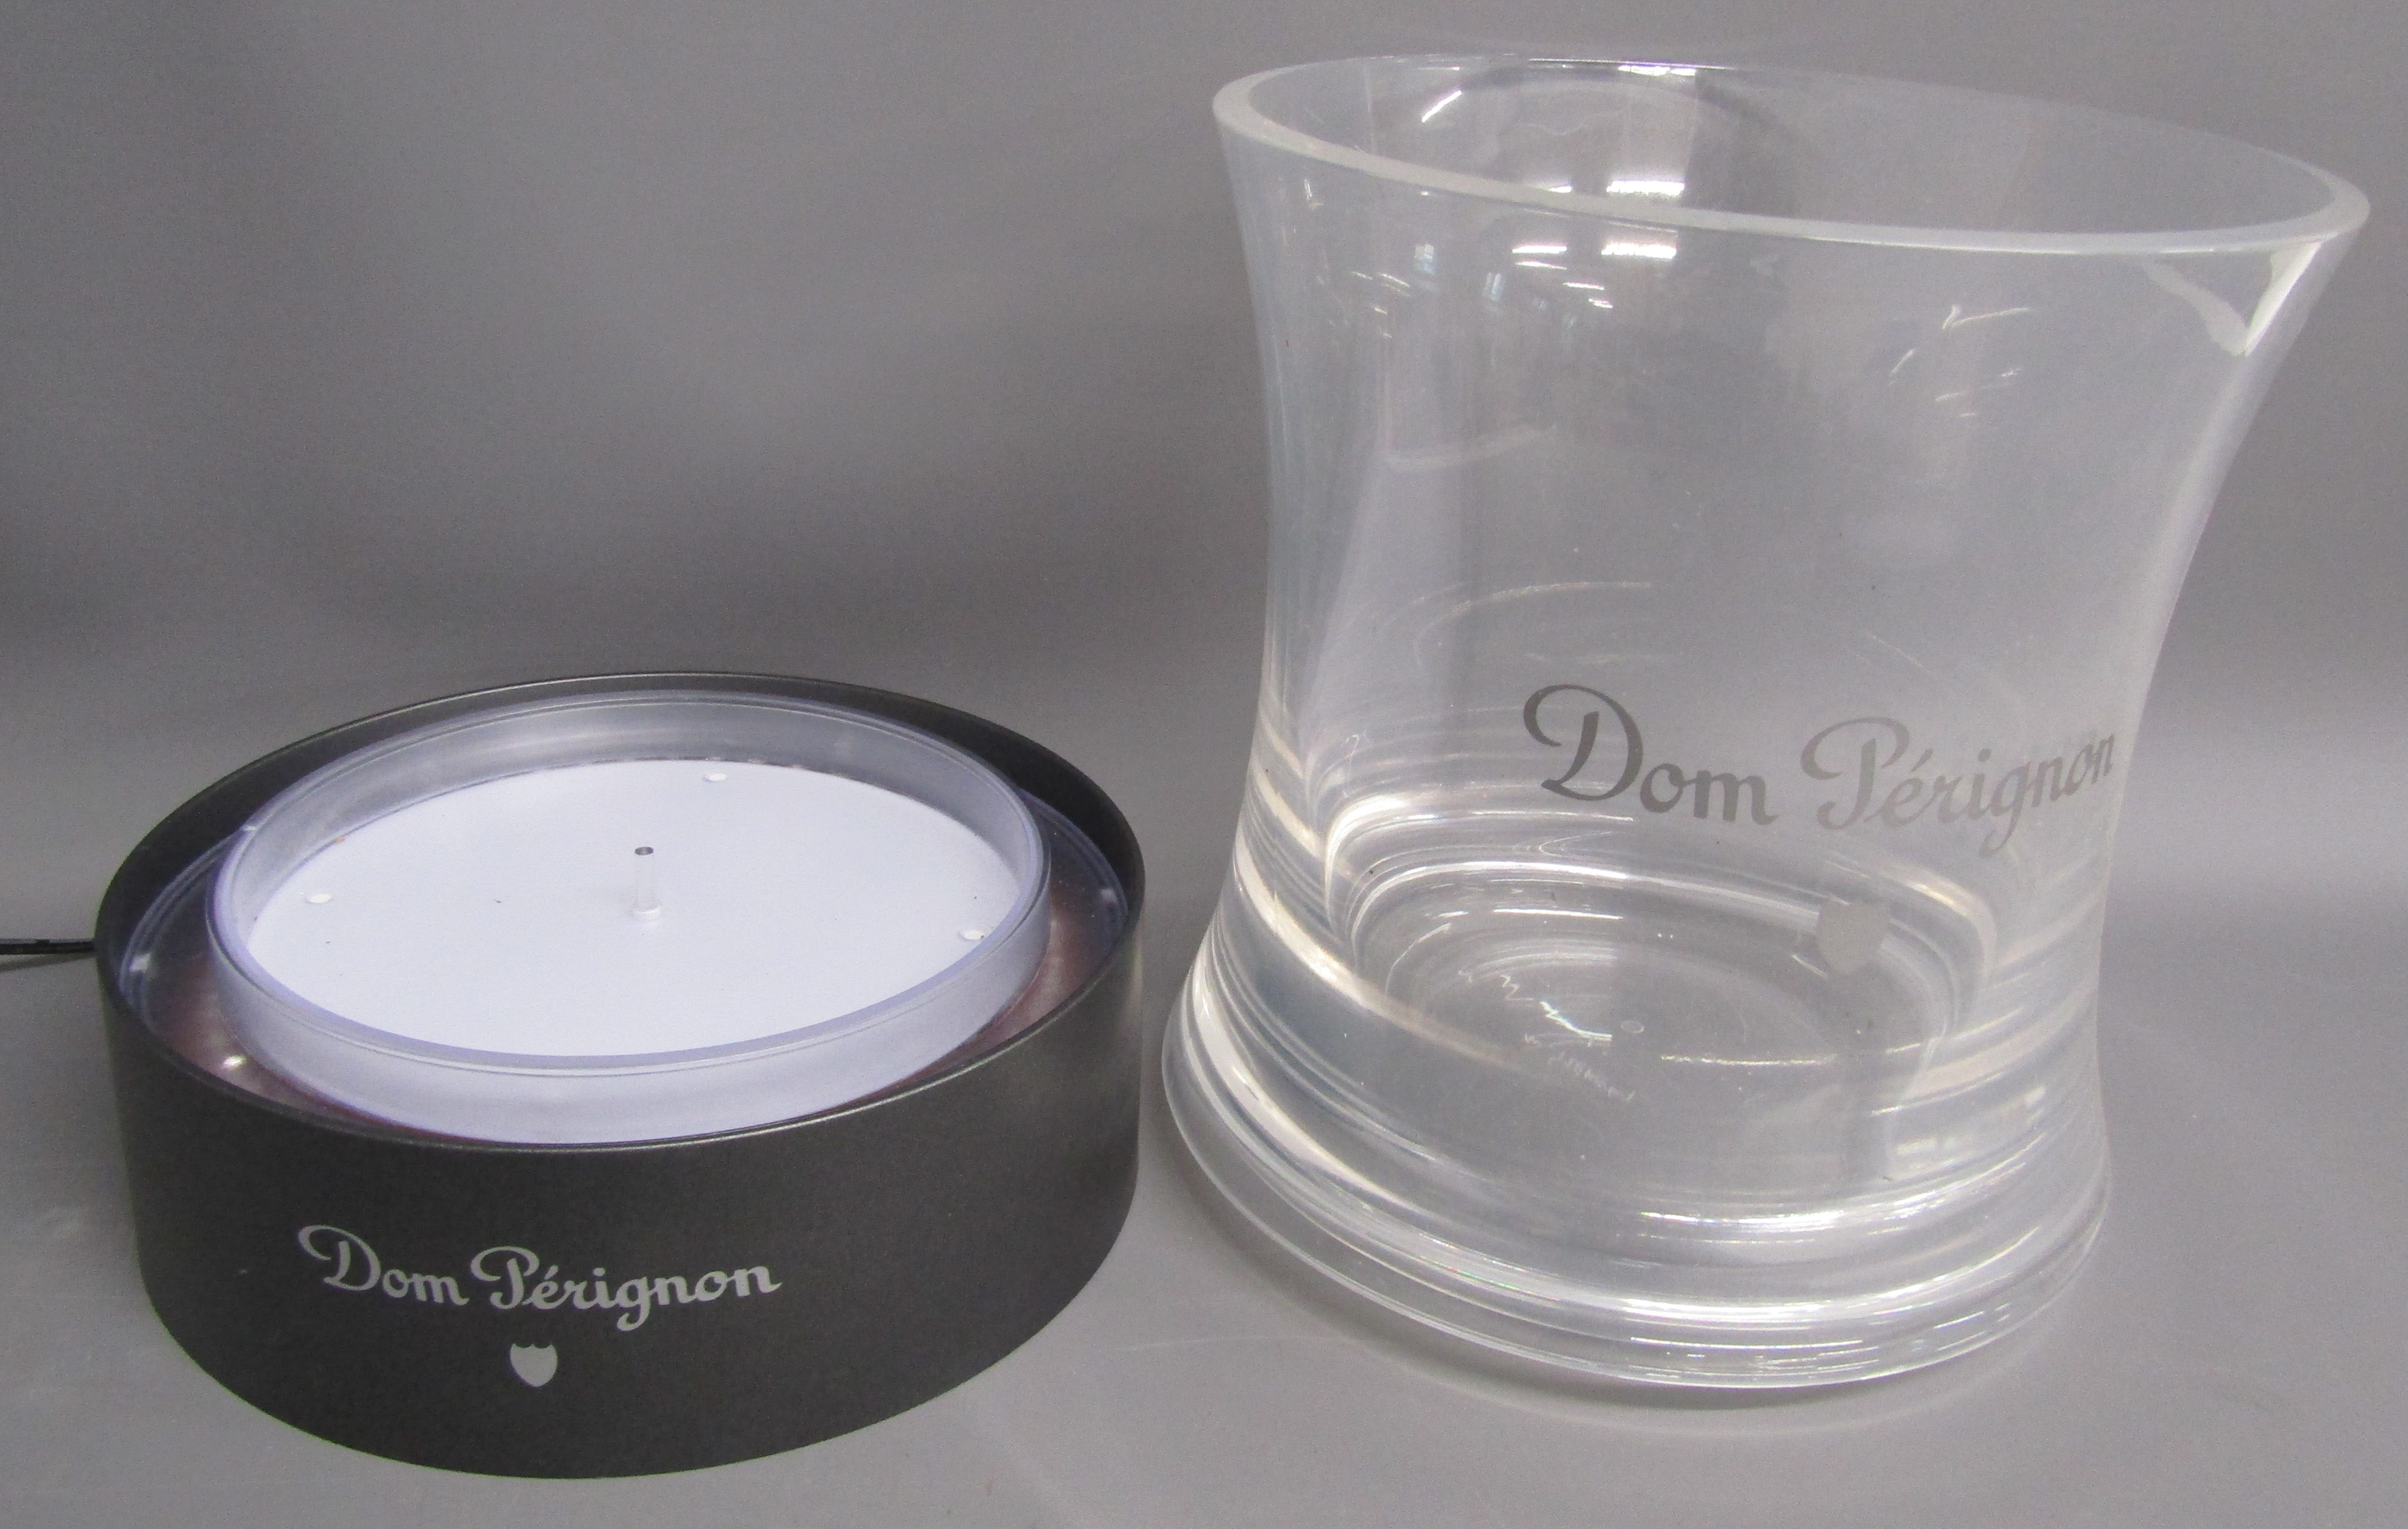 Dom Perignon acrylic ice bucket with Andy Warhol colour changing light up base - Image 4 of 5